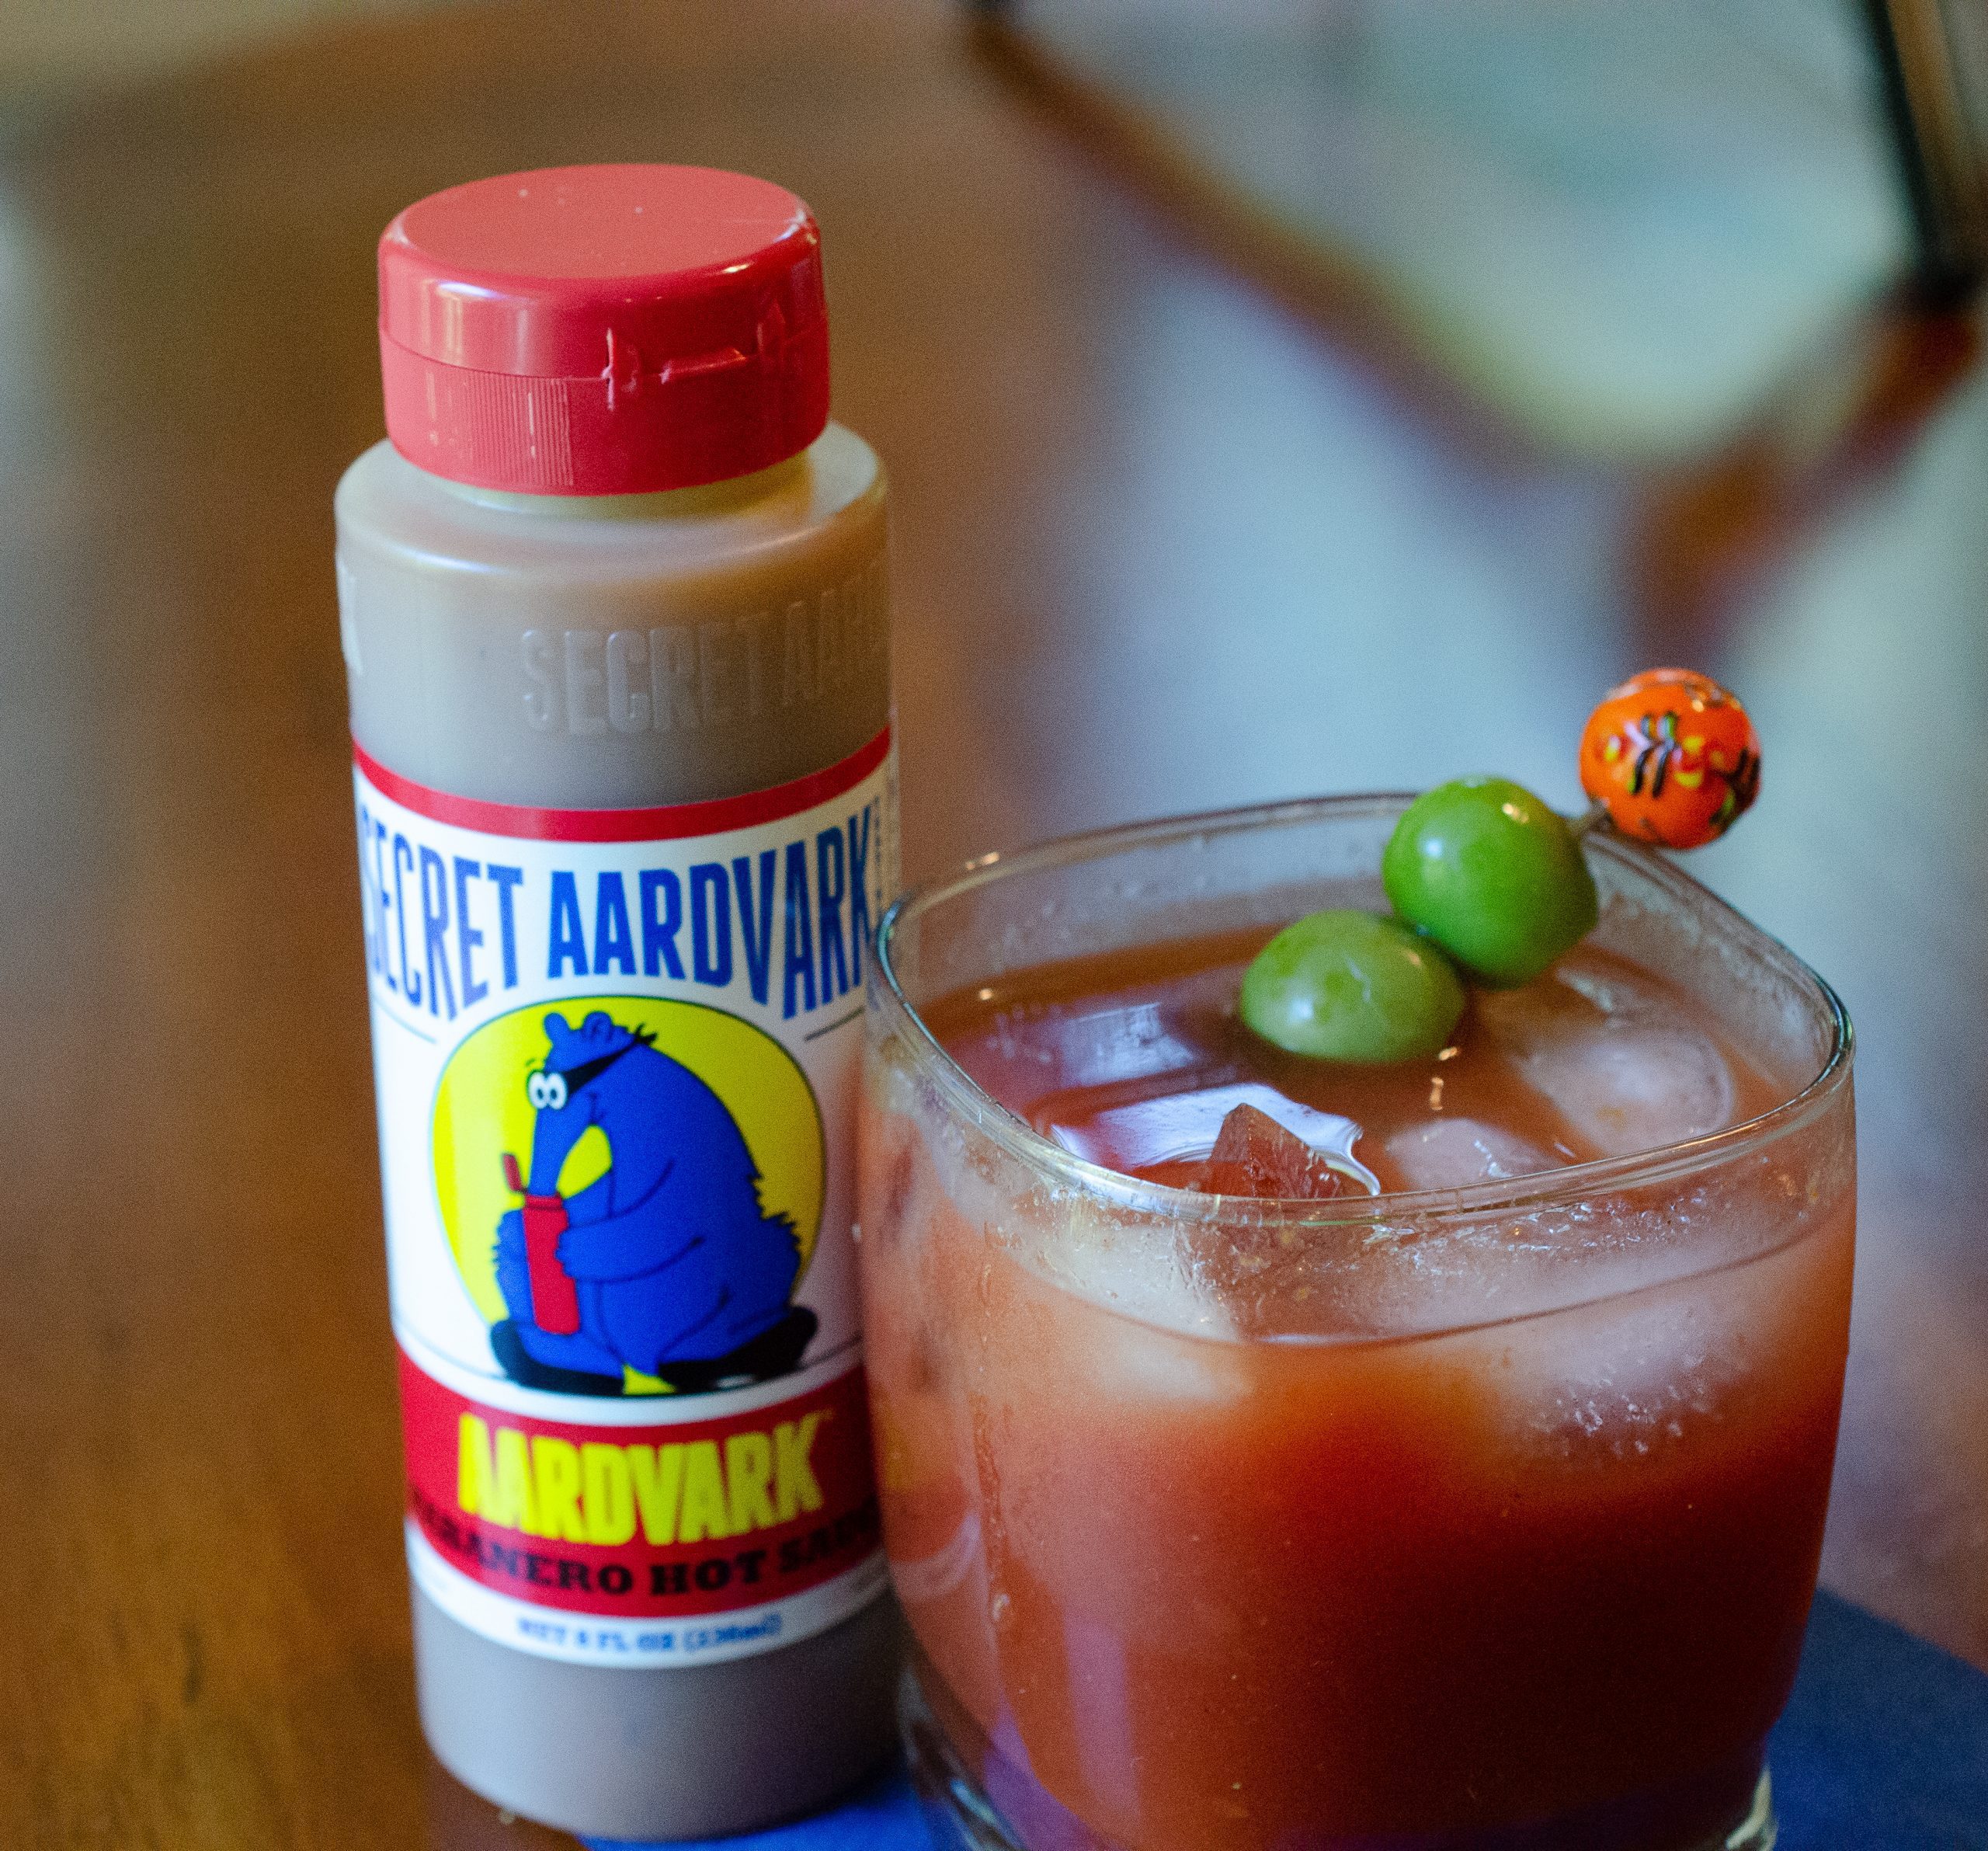 A bloody mary and two olives as a garnish sitting next to a bottle of Aardvark Habanero hot sauce